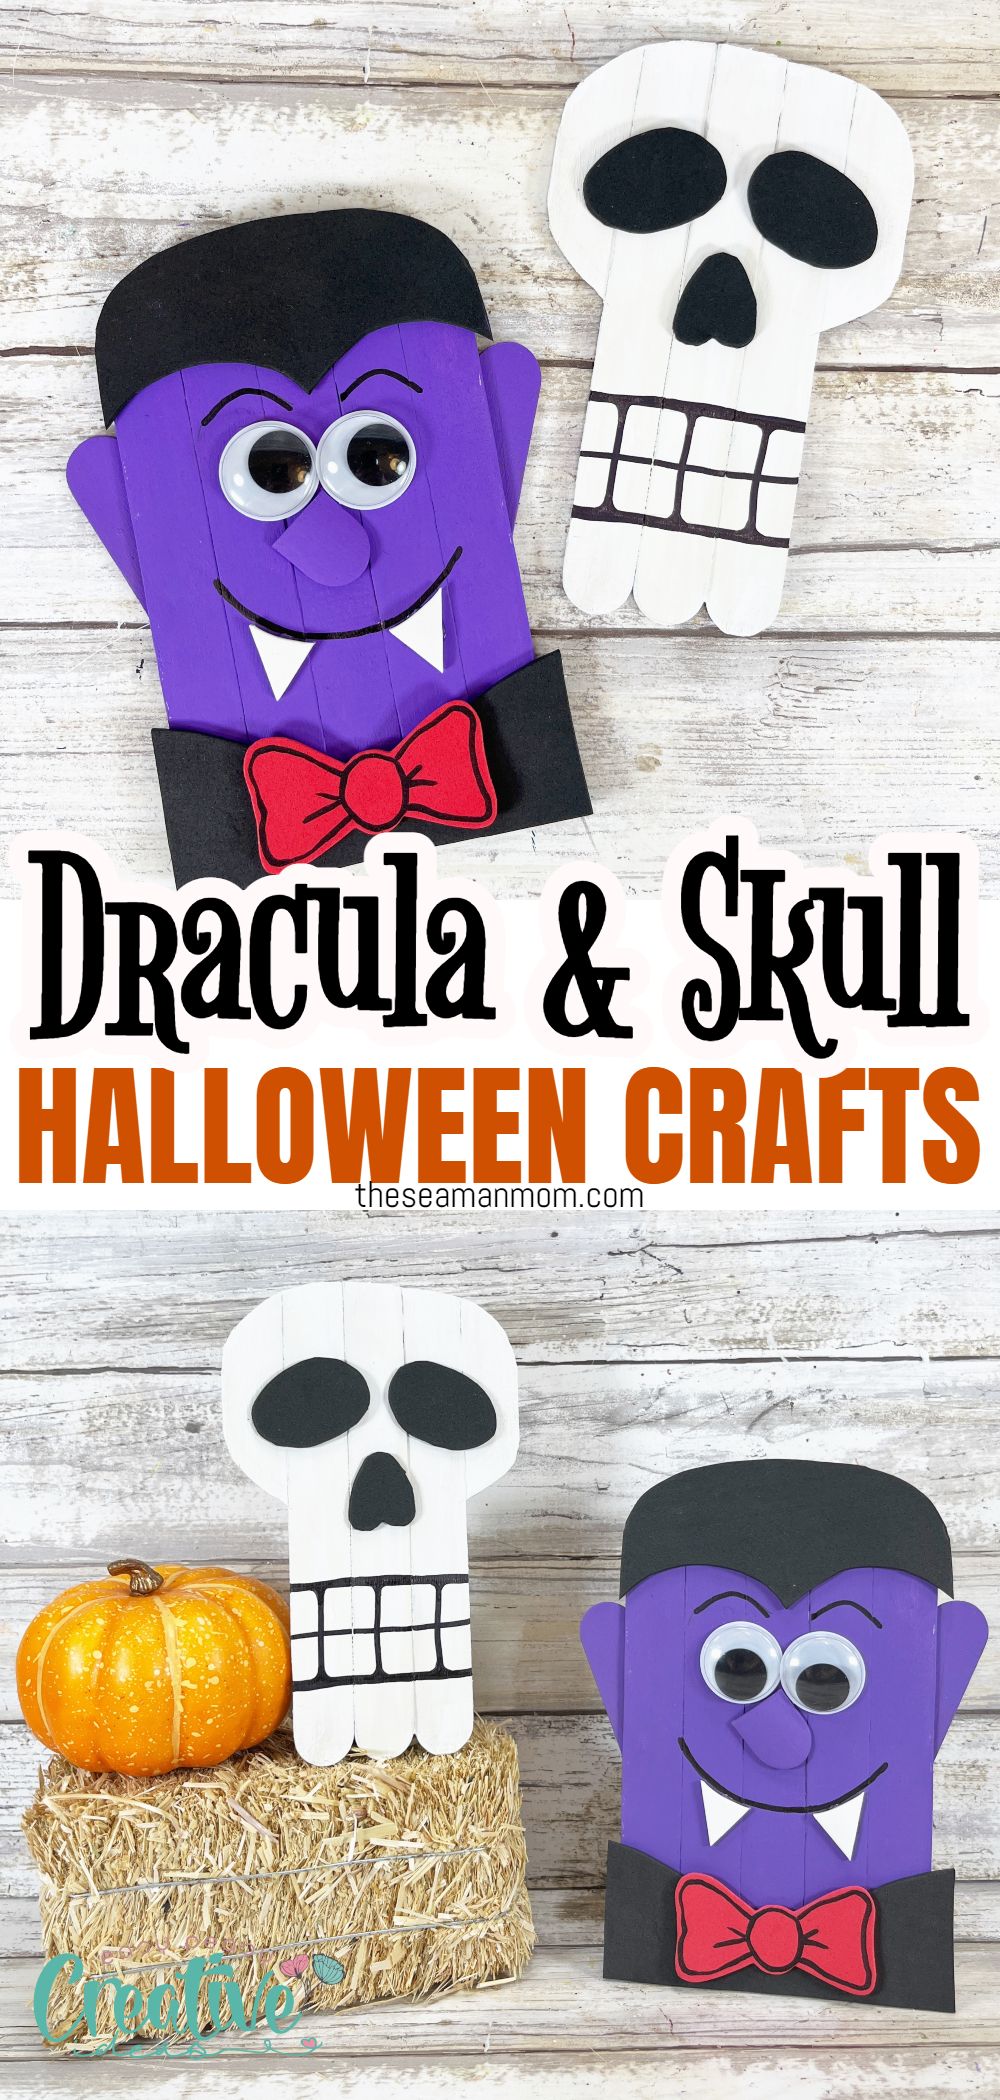 Halloween decorations don't have to be expensive! With a trip to the dollar store, you can make this fun and easy Dollar Store Craft Stick Dracula & Skull Craft. Perfect for a party or just to get into the Halloween spirit, dollar tree Halloween crafts are sure to be a hit with kids of all ages. via @petroneagu